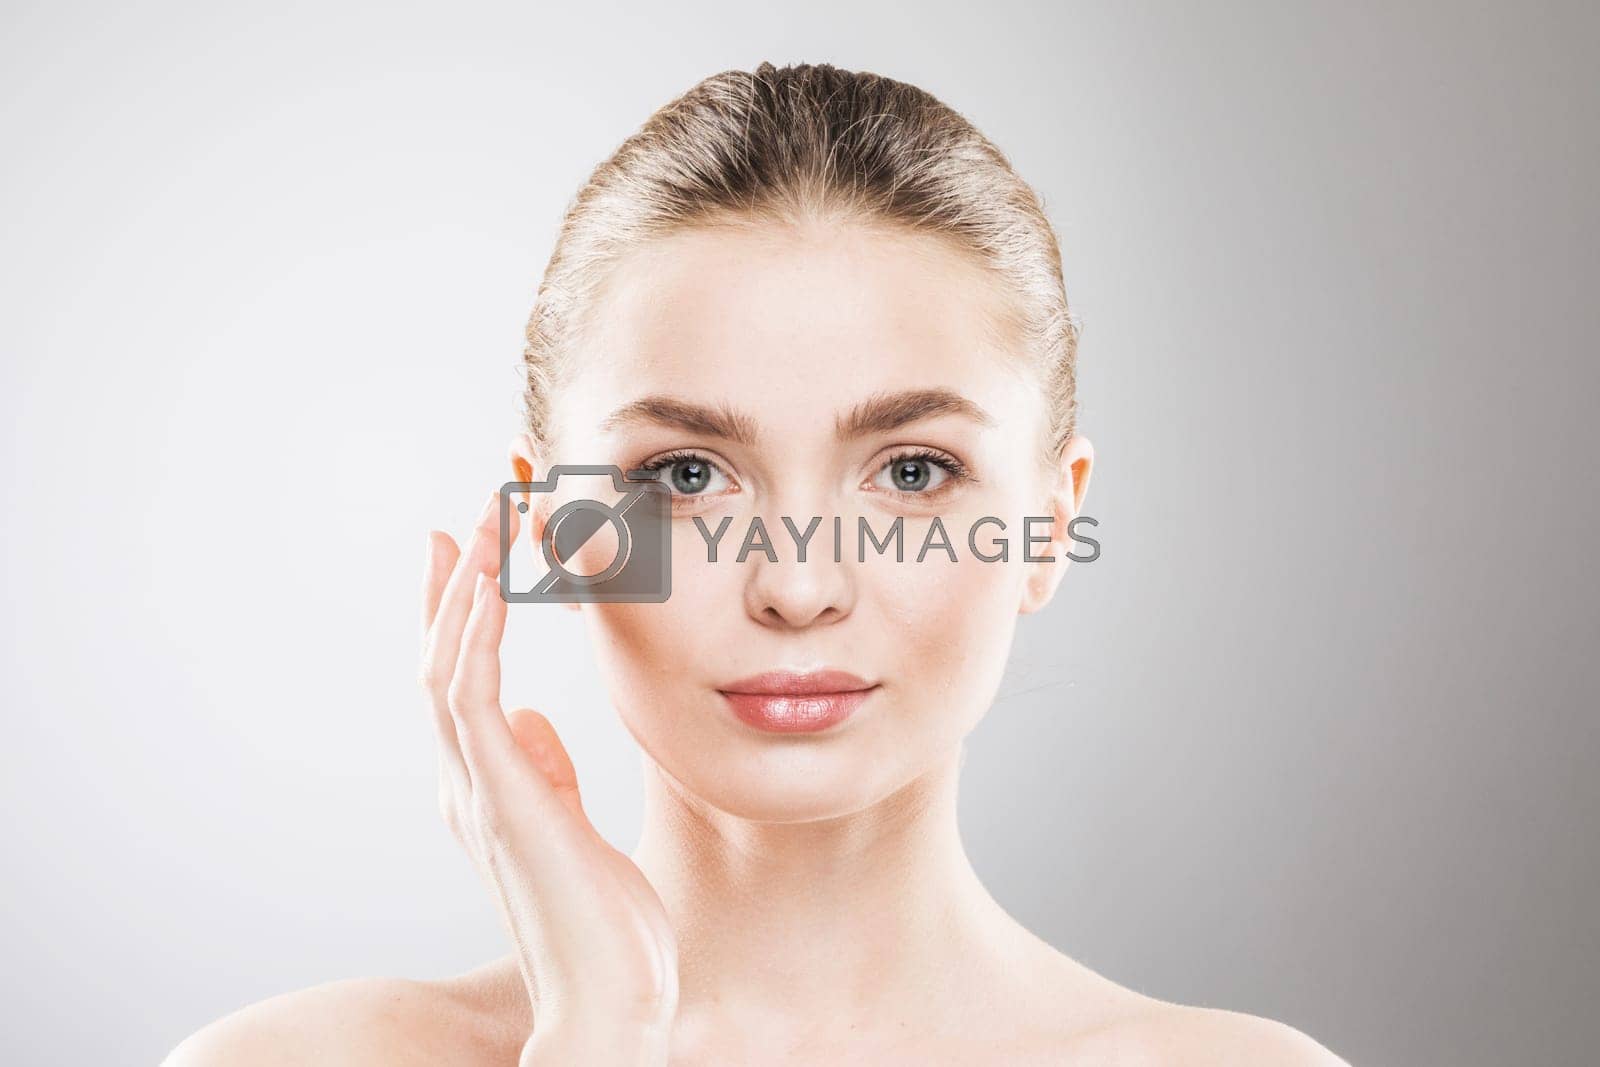 Royalty free image of Beauty woman face portrait by Yellowj